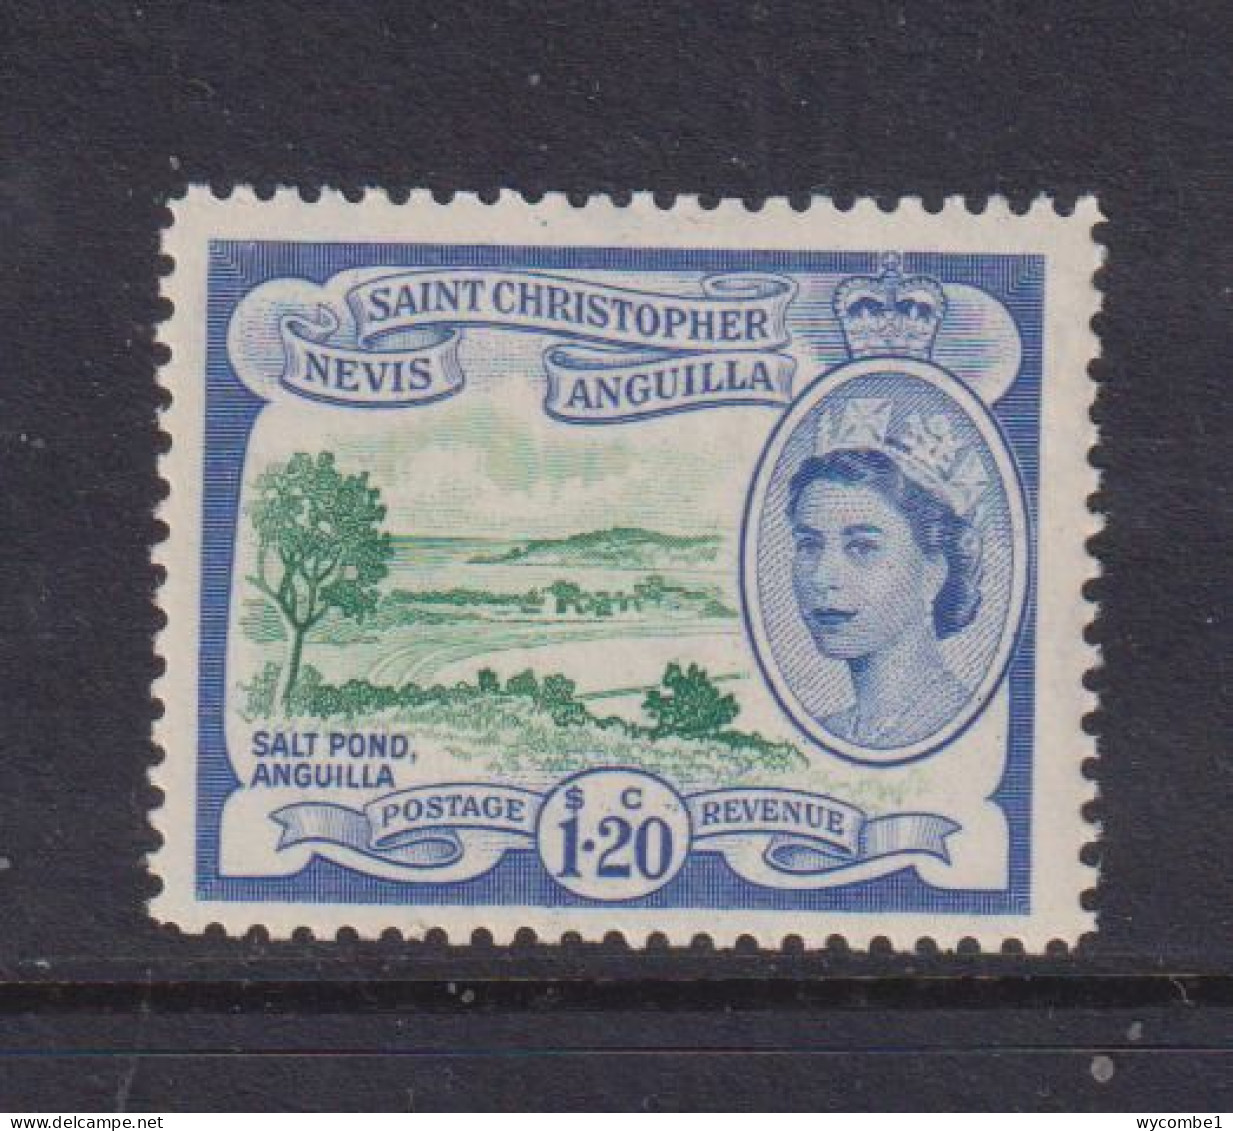 ST CHRISTOPHER NEVIS AND ANGUILLA - 1954  $1.20 Never Hinged Mint - St.Christopher-Nevis-Anguilla (...-1980)